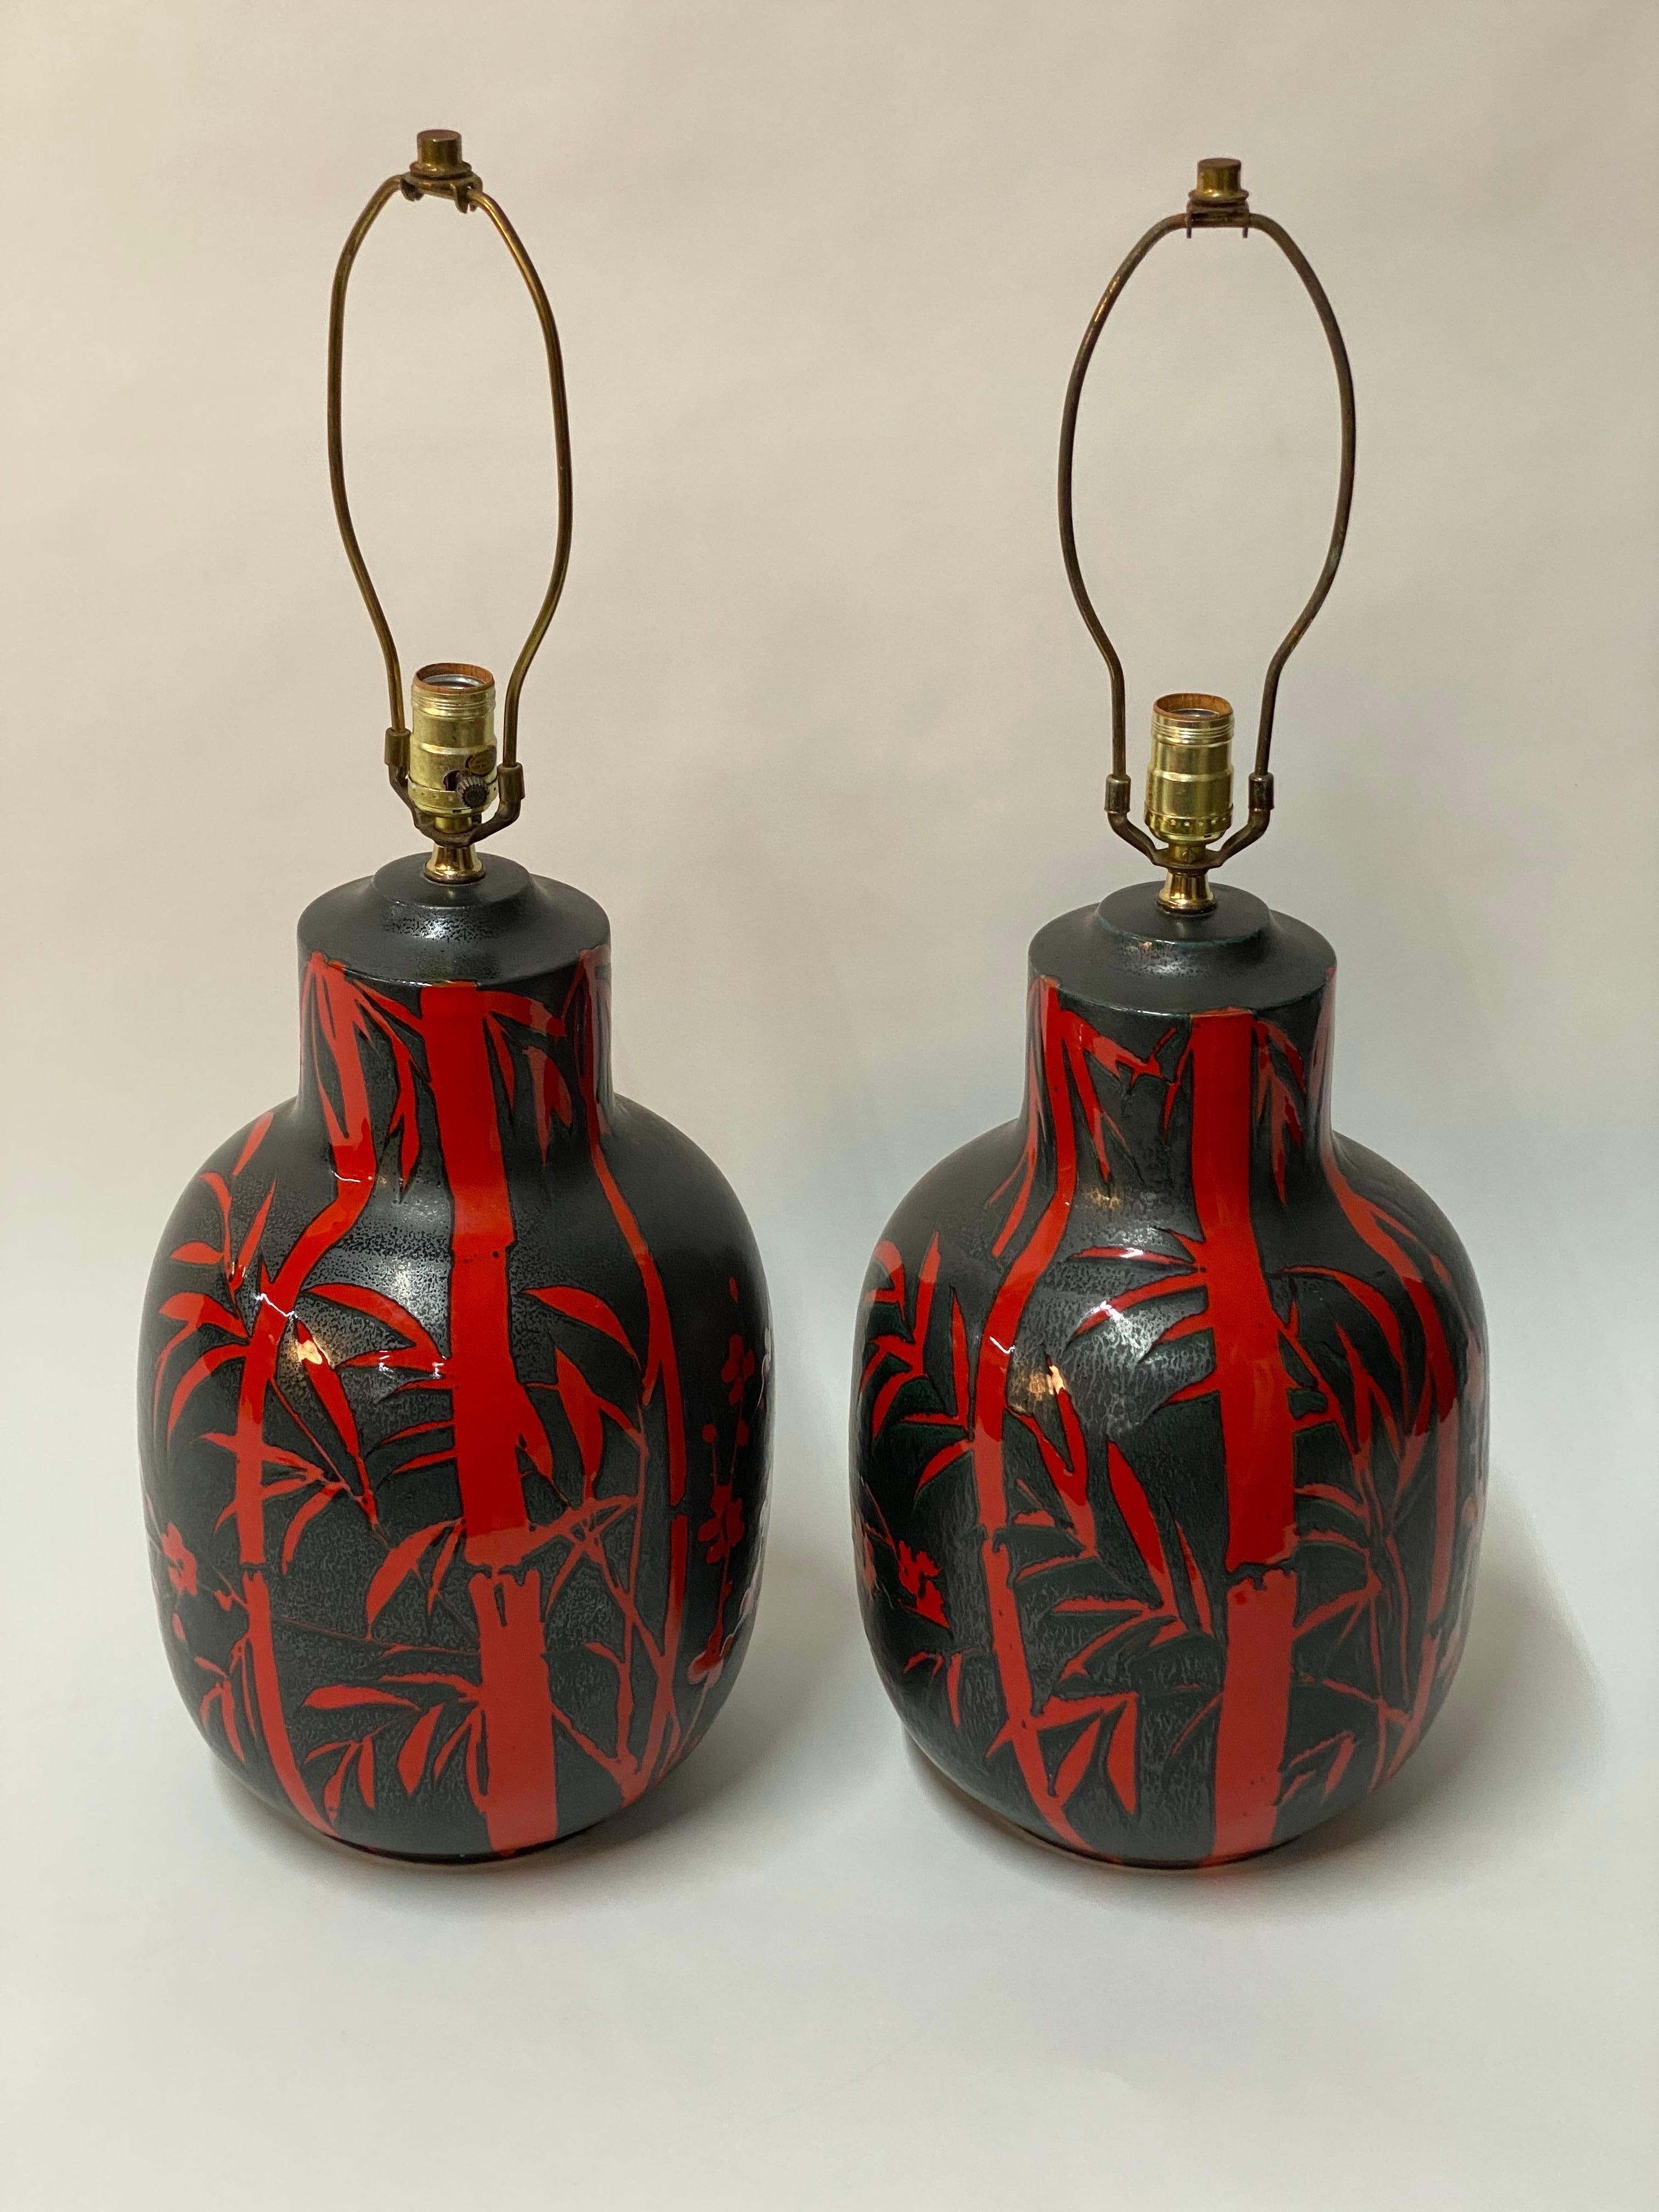 Alvino Bagni Bitossi Bamboo and Butterfly Pottery Table Lamps, Pair In Good Condition For Sale In Garnerville, NY